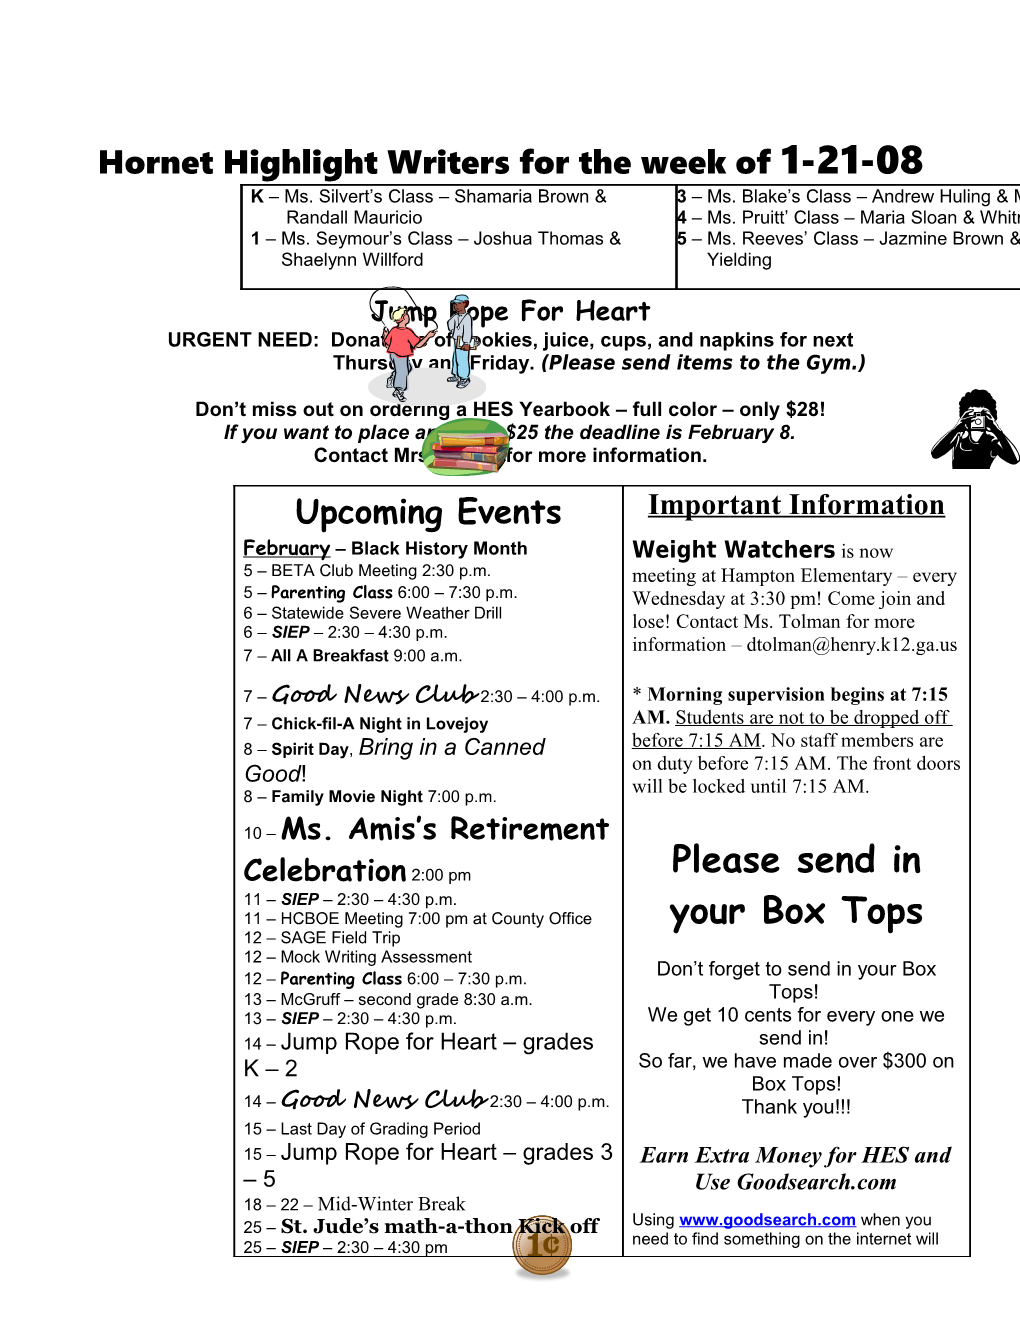 Hornet Highlight Writers for the Week of 1-21-08